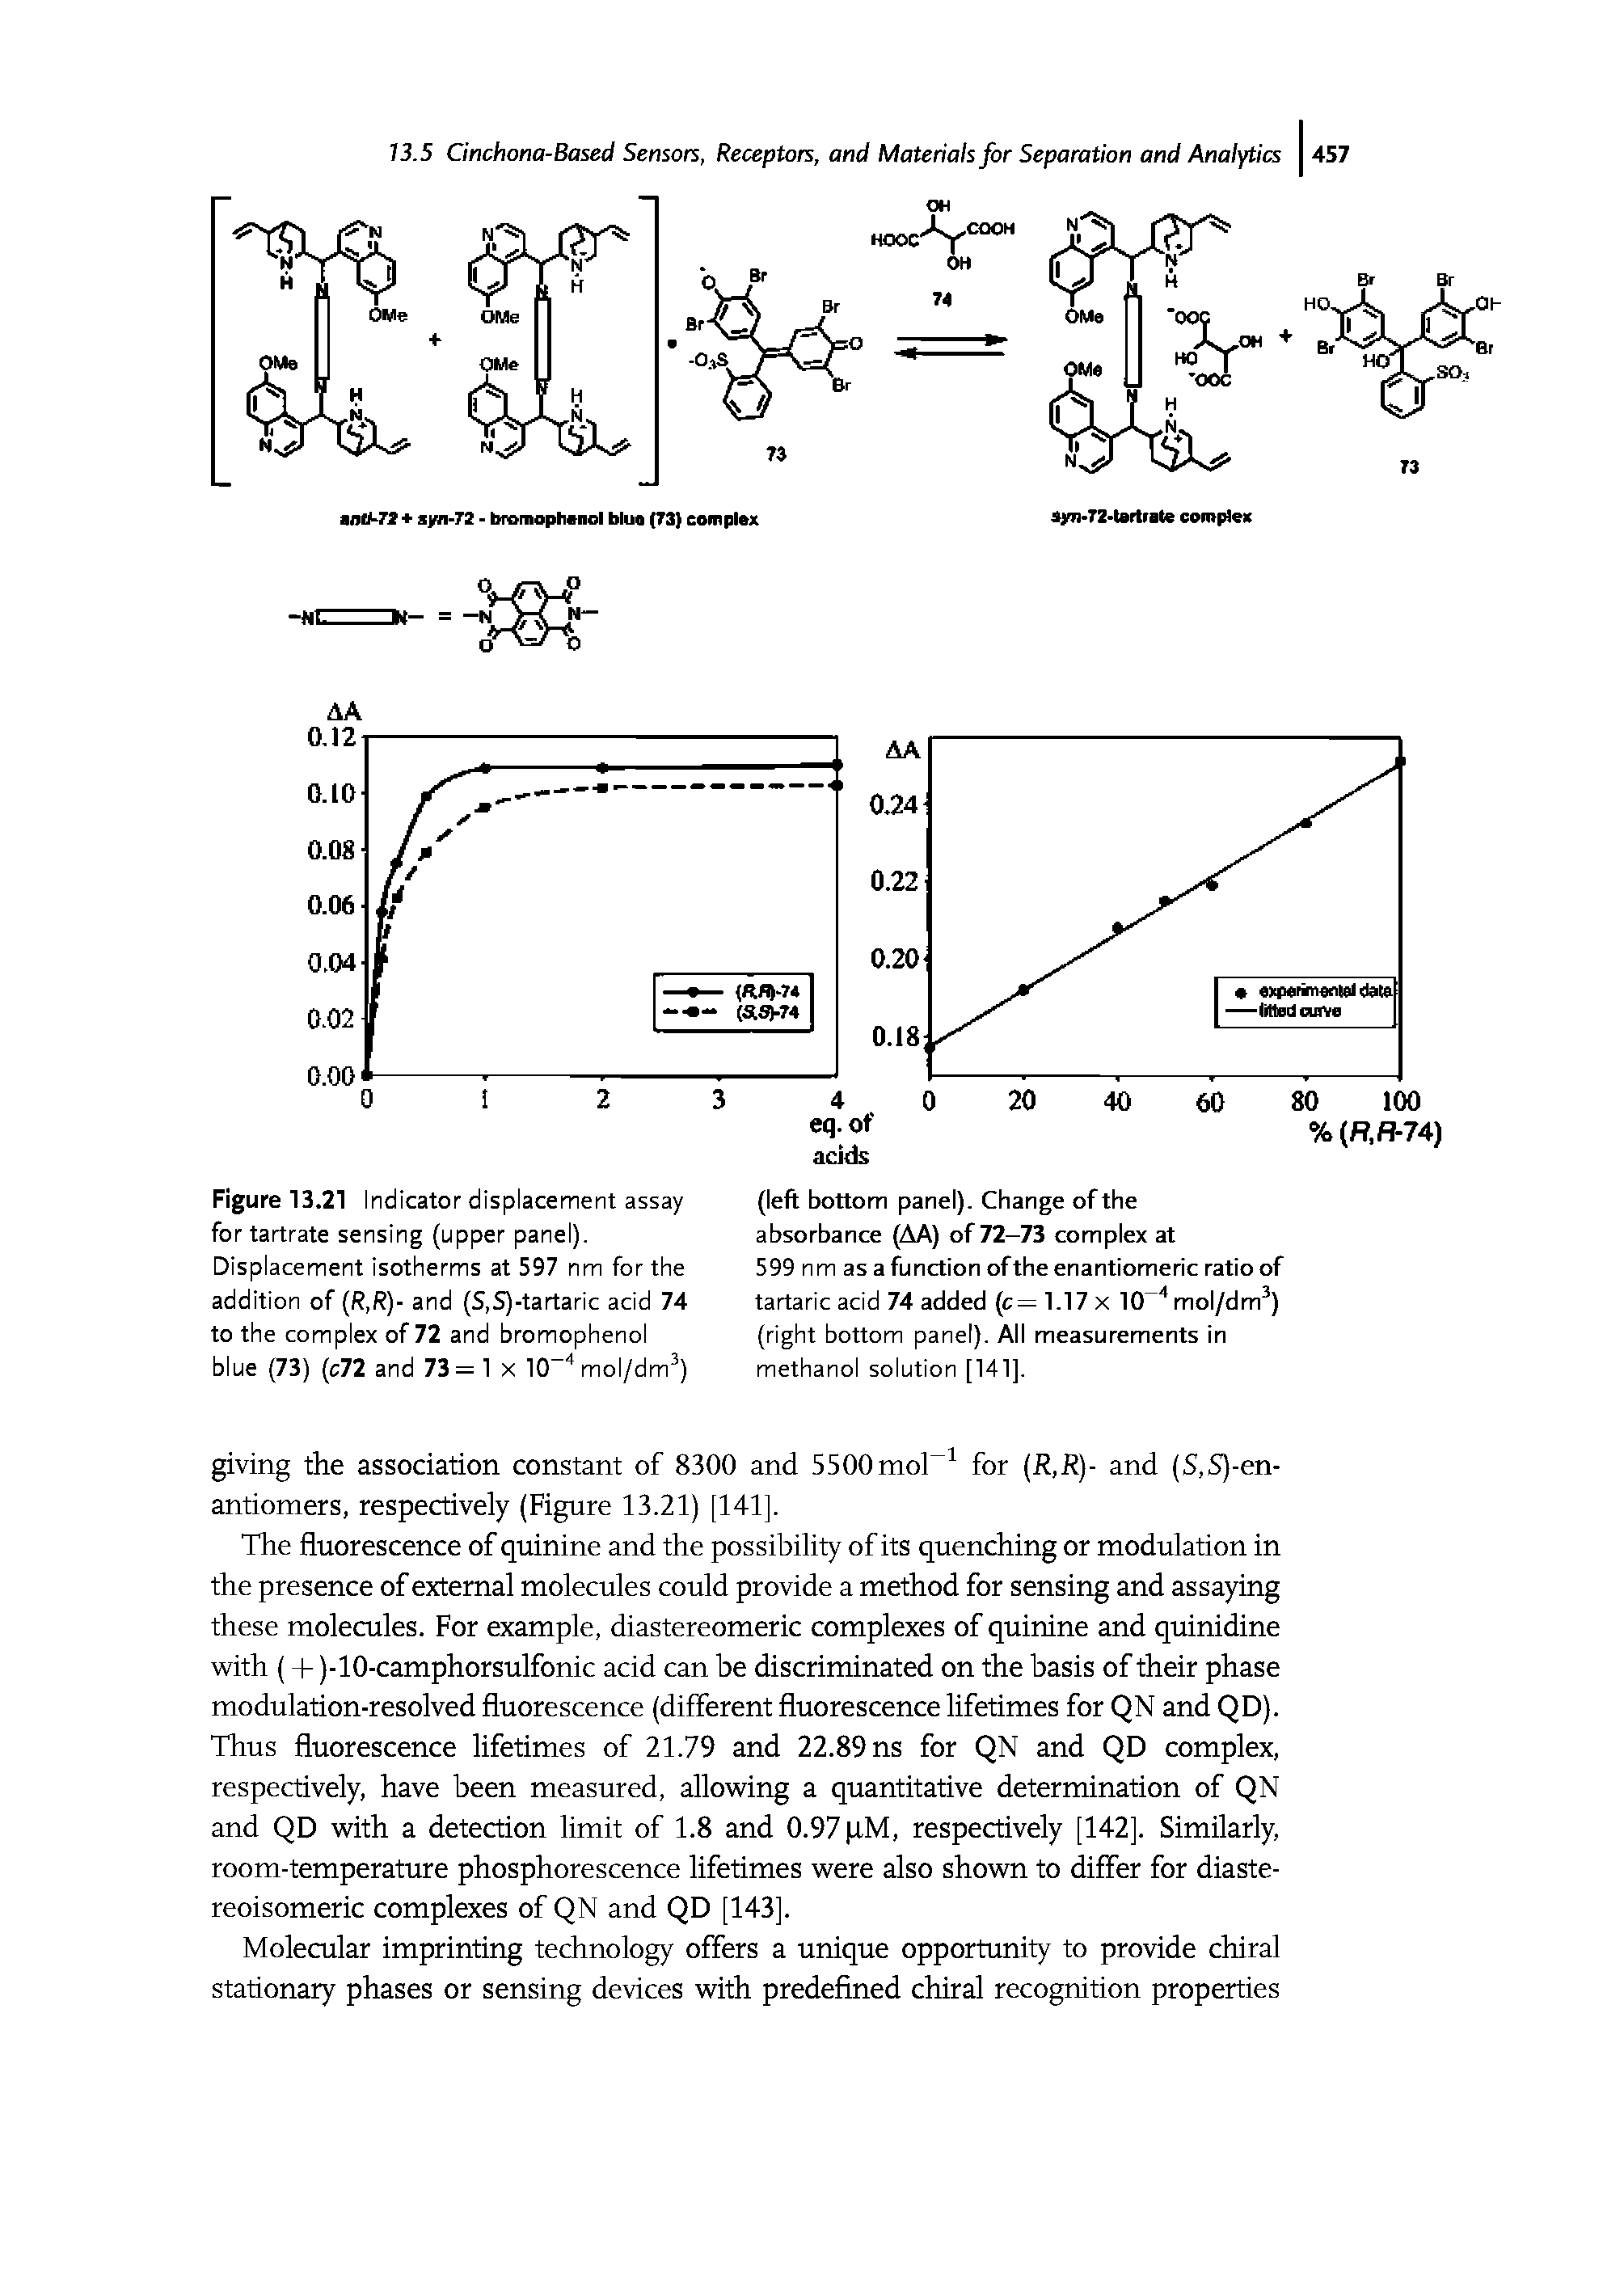 Figure 13.21 Indicator displacement assay for tartrate sensing (upper panel). Displacement isotherms at 597 nm for the addition of (R,R)- and (S,S)-tartaric acid 74 to the complex of 72 and bromophenol blue (73) (c72 and 73=1 x 10 4mol/dm3)...